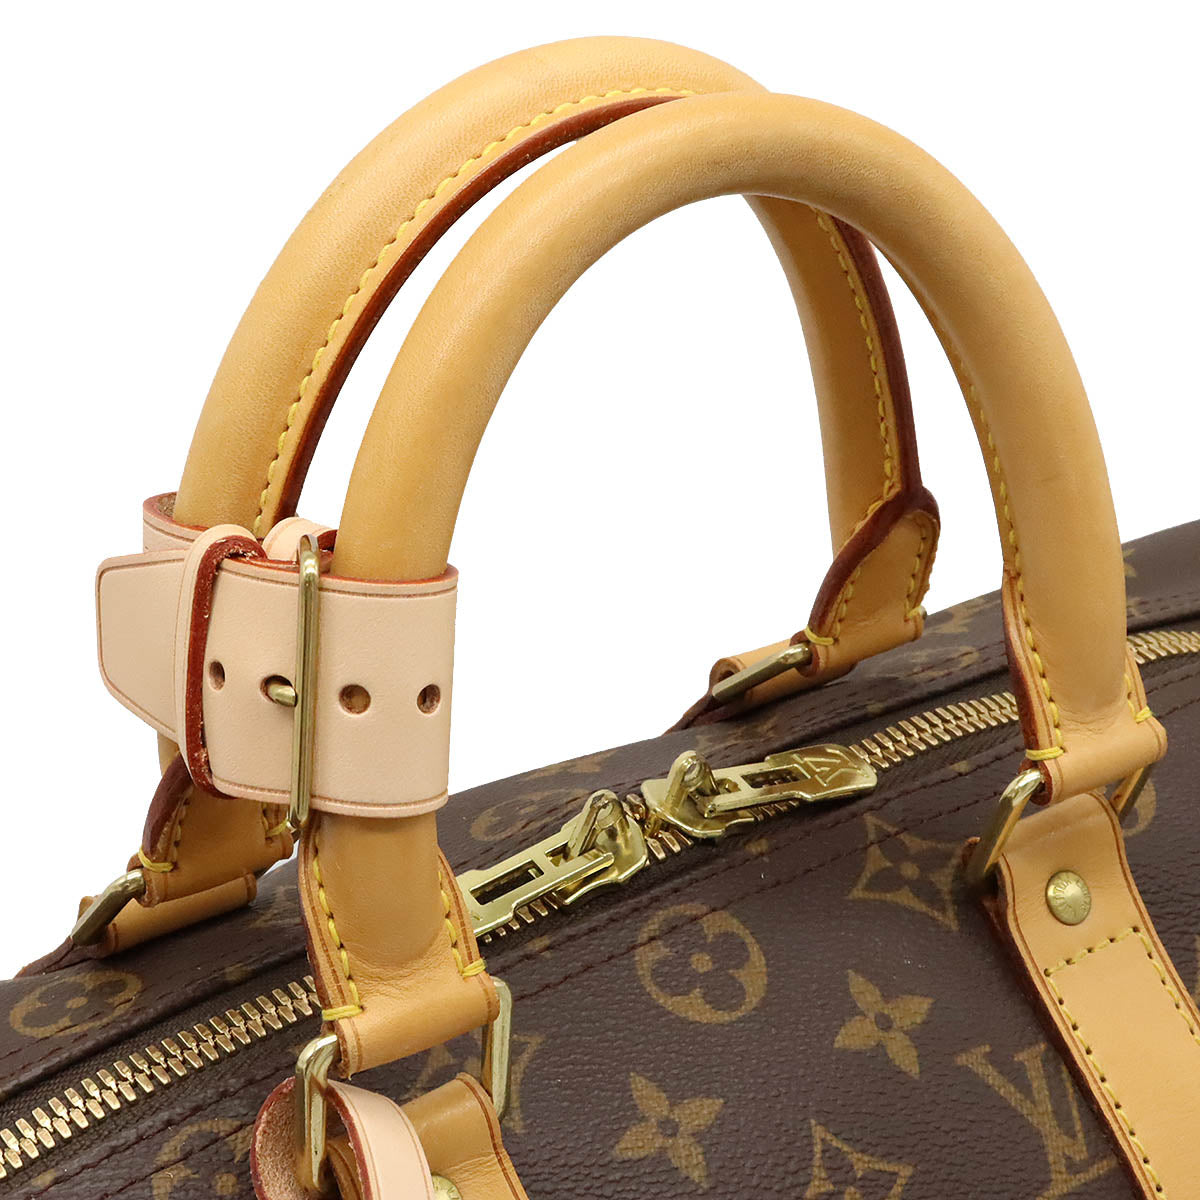 LOUIS VUITTON Monogram Sac Bandouliere 30 Bag Old Model French company